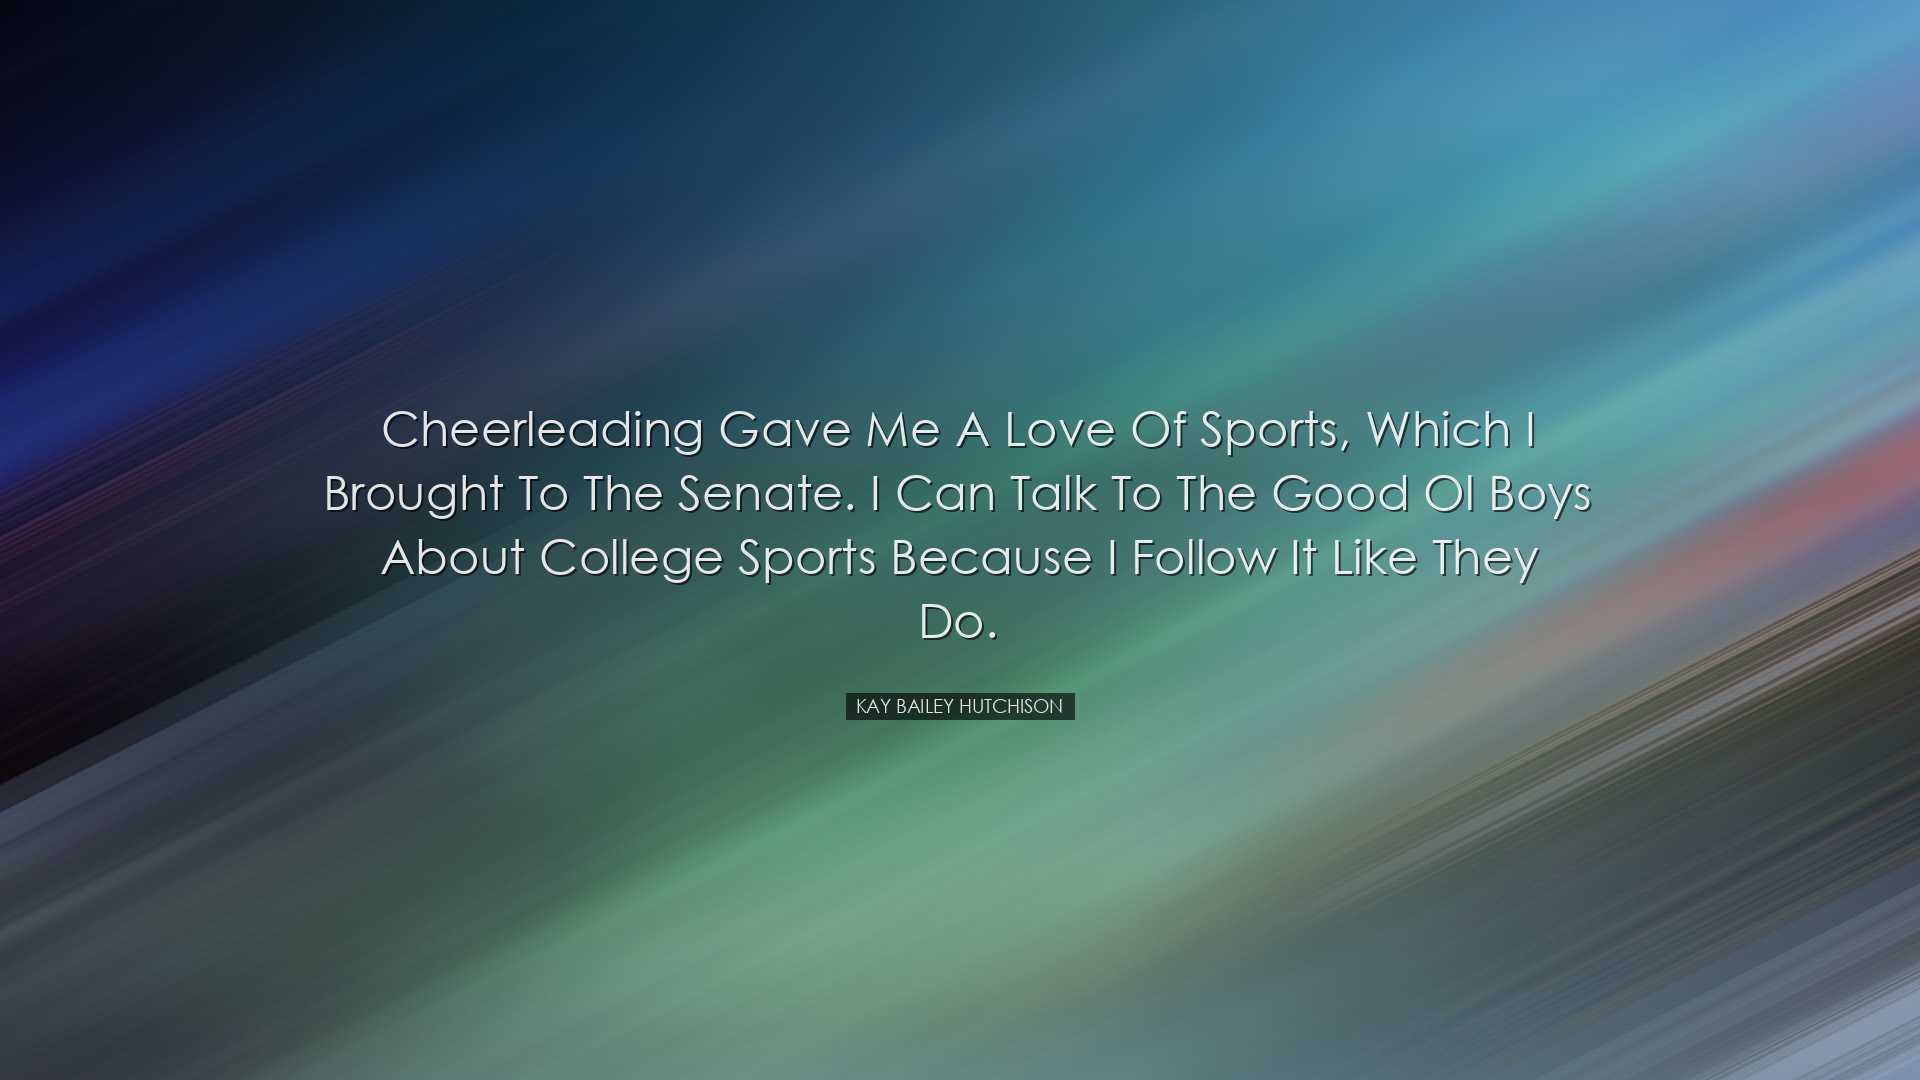 Cheerleading gave me a love of sports, which I brought to the Sena